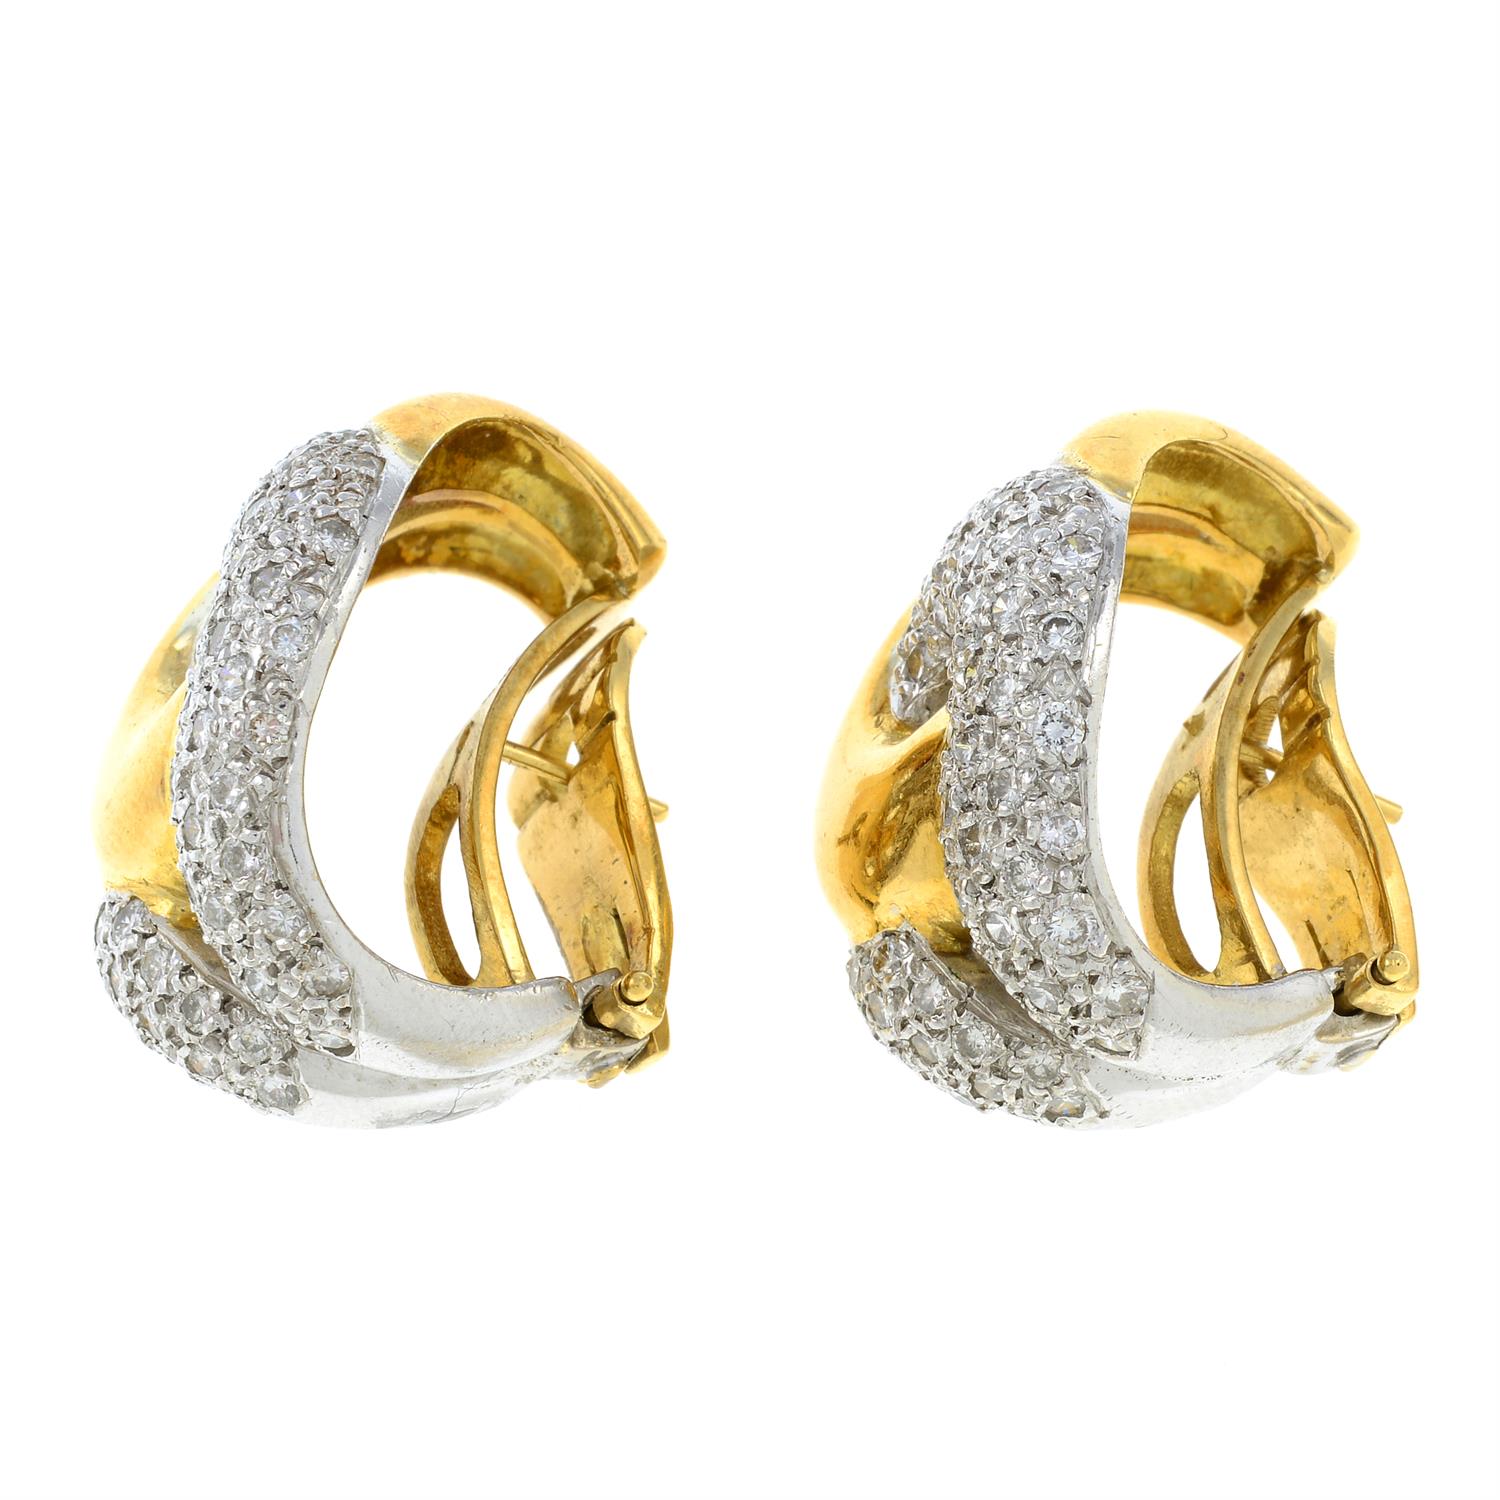 A pair of brilliant-cut diamond knot earrings. - Image 2 of 2